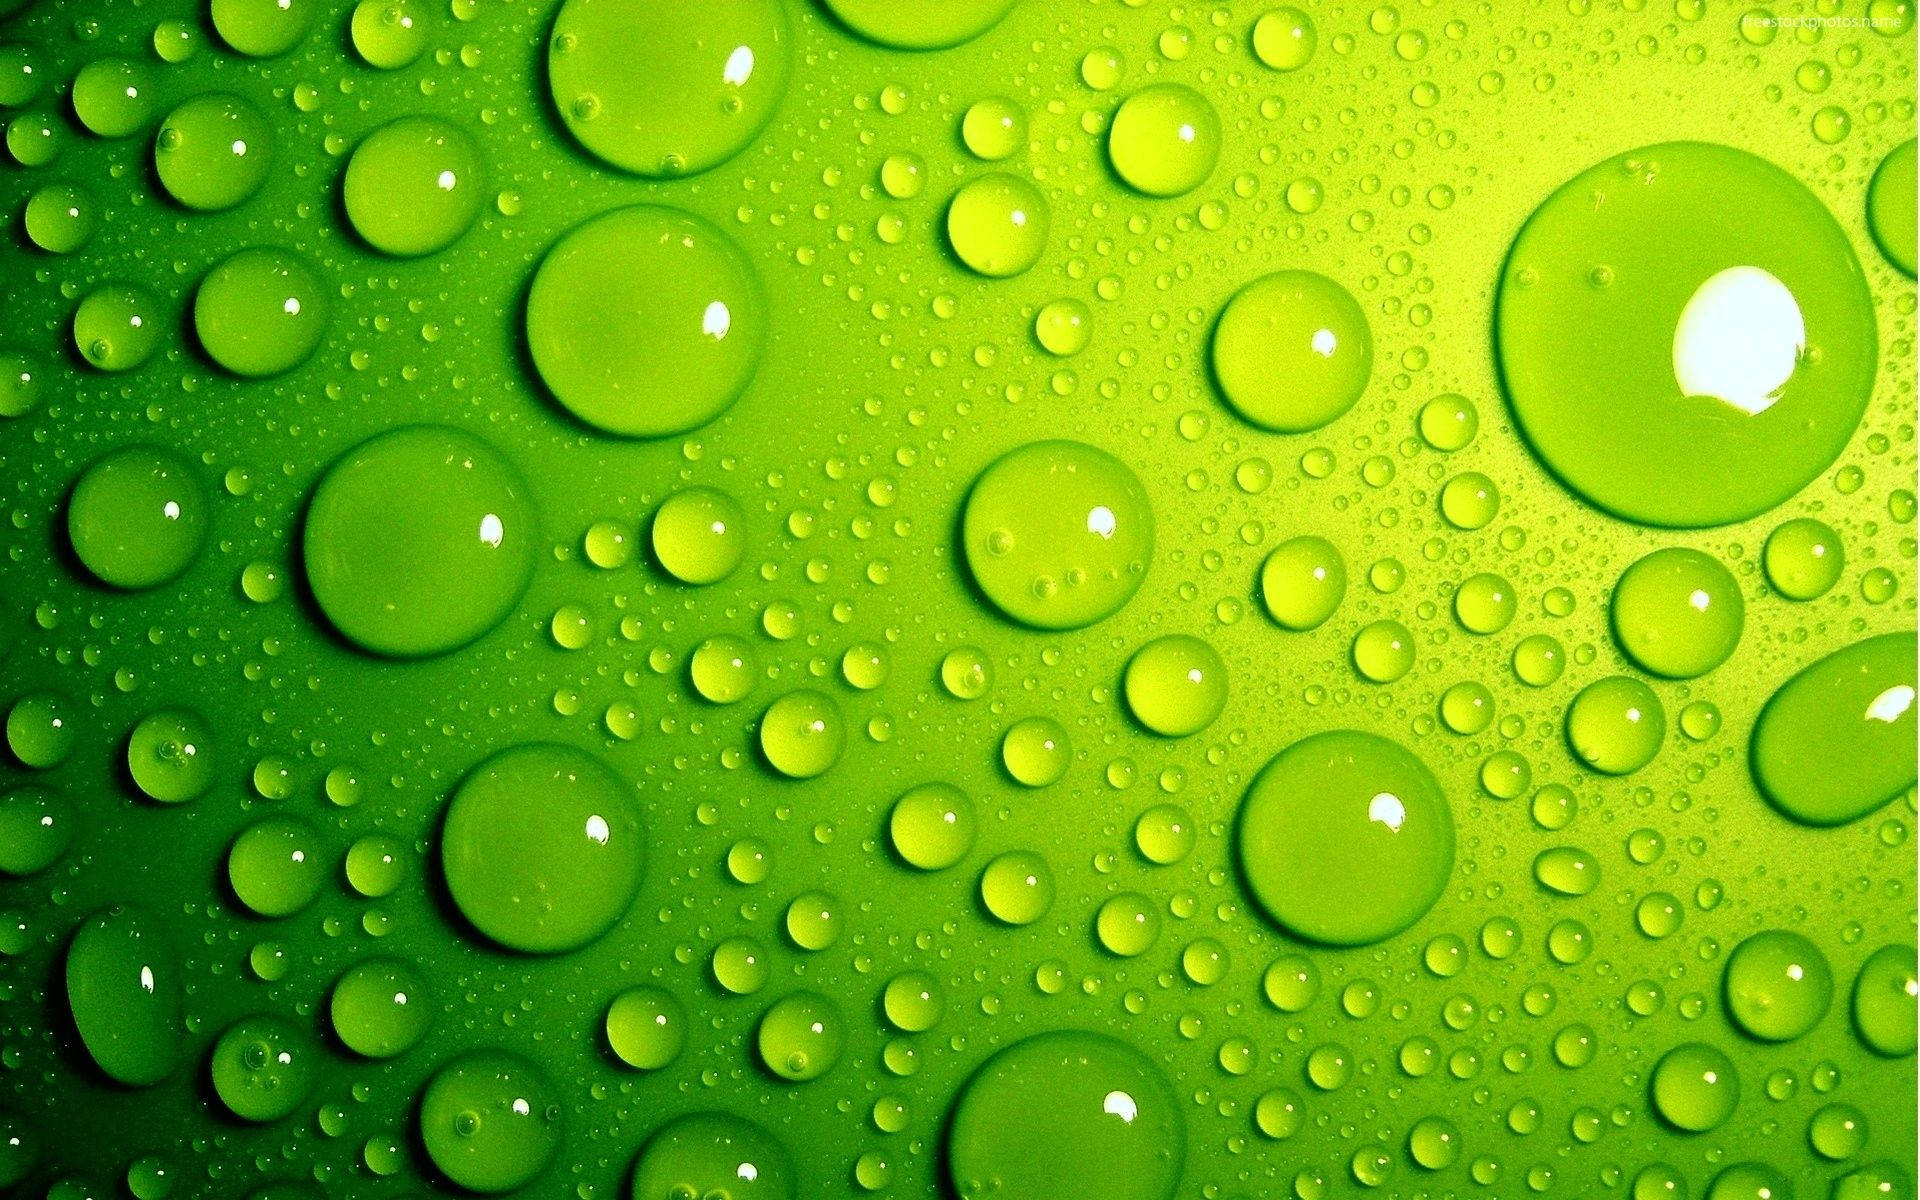 Reflection Of Green In Aqueous Droplets Wallpaper